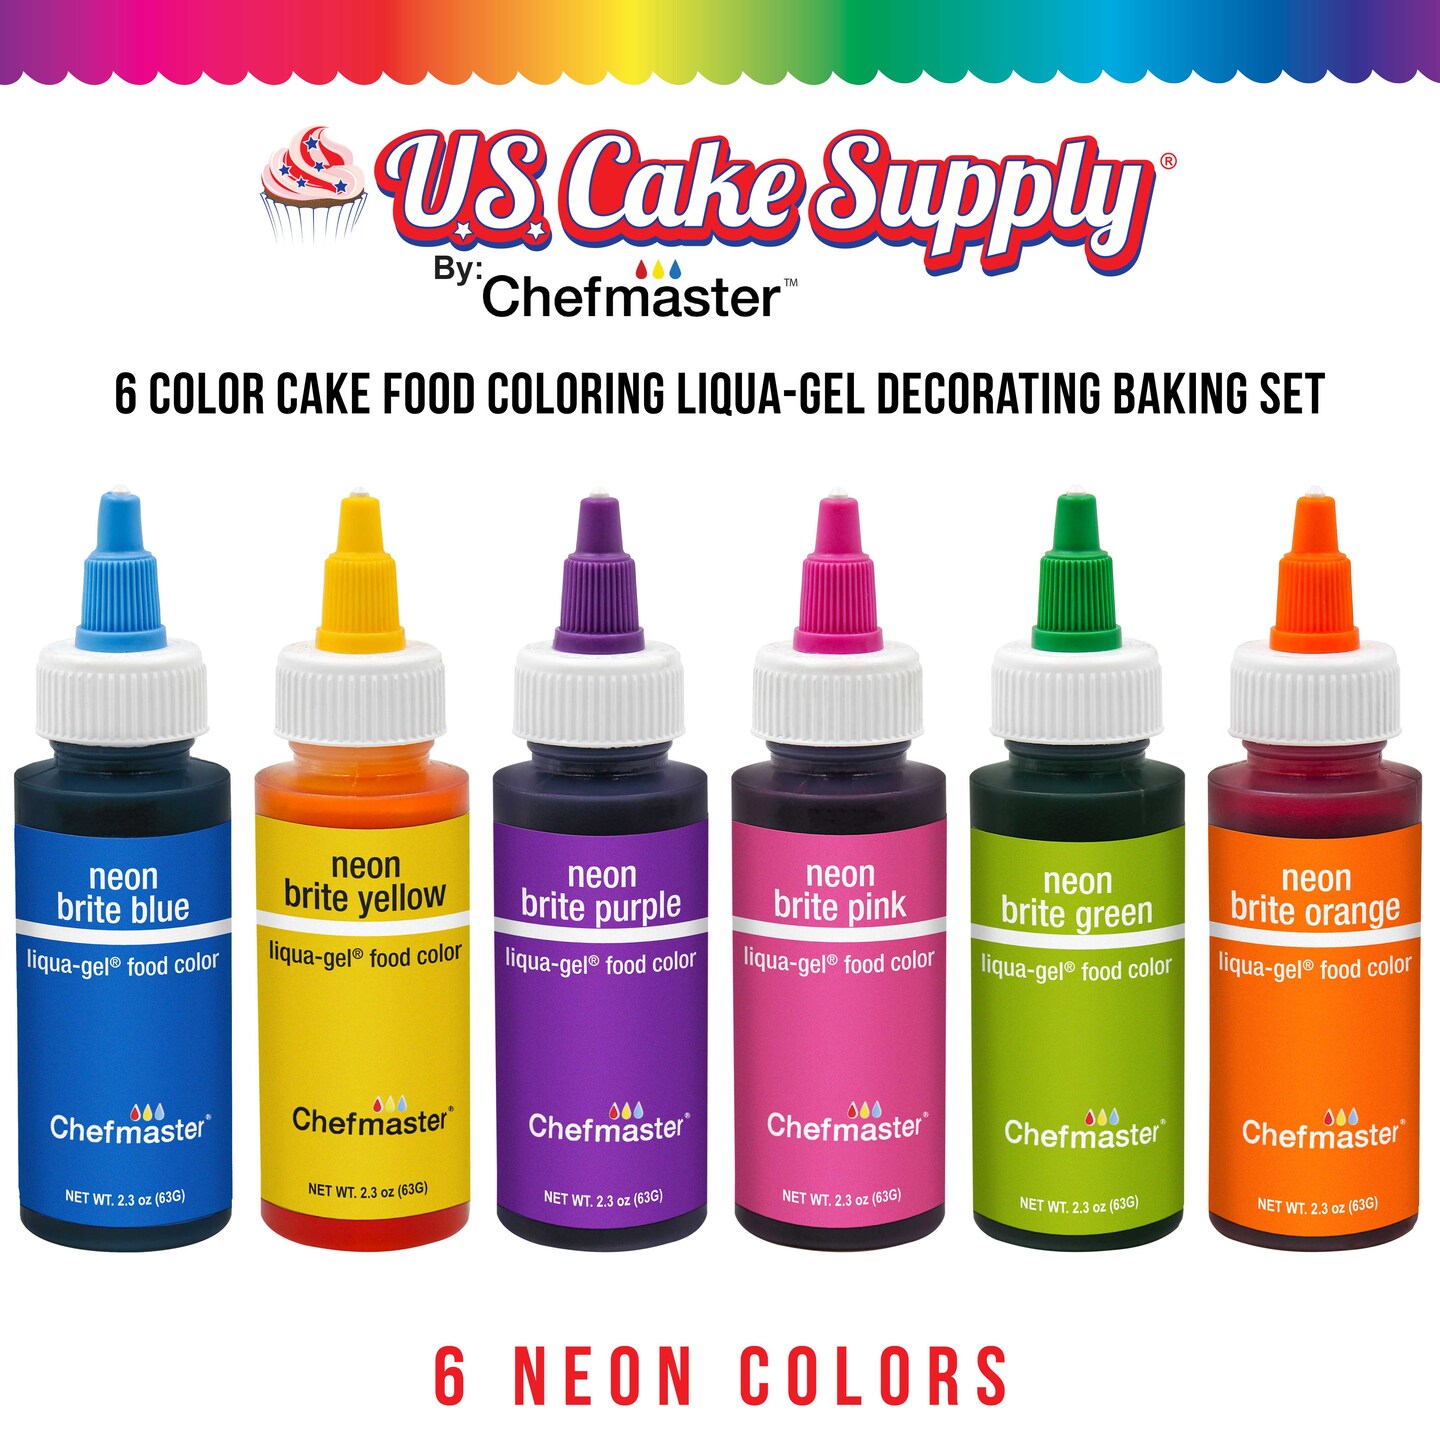 US Cake Supply Chefmaster glow in the dark neon food coloring